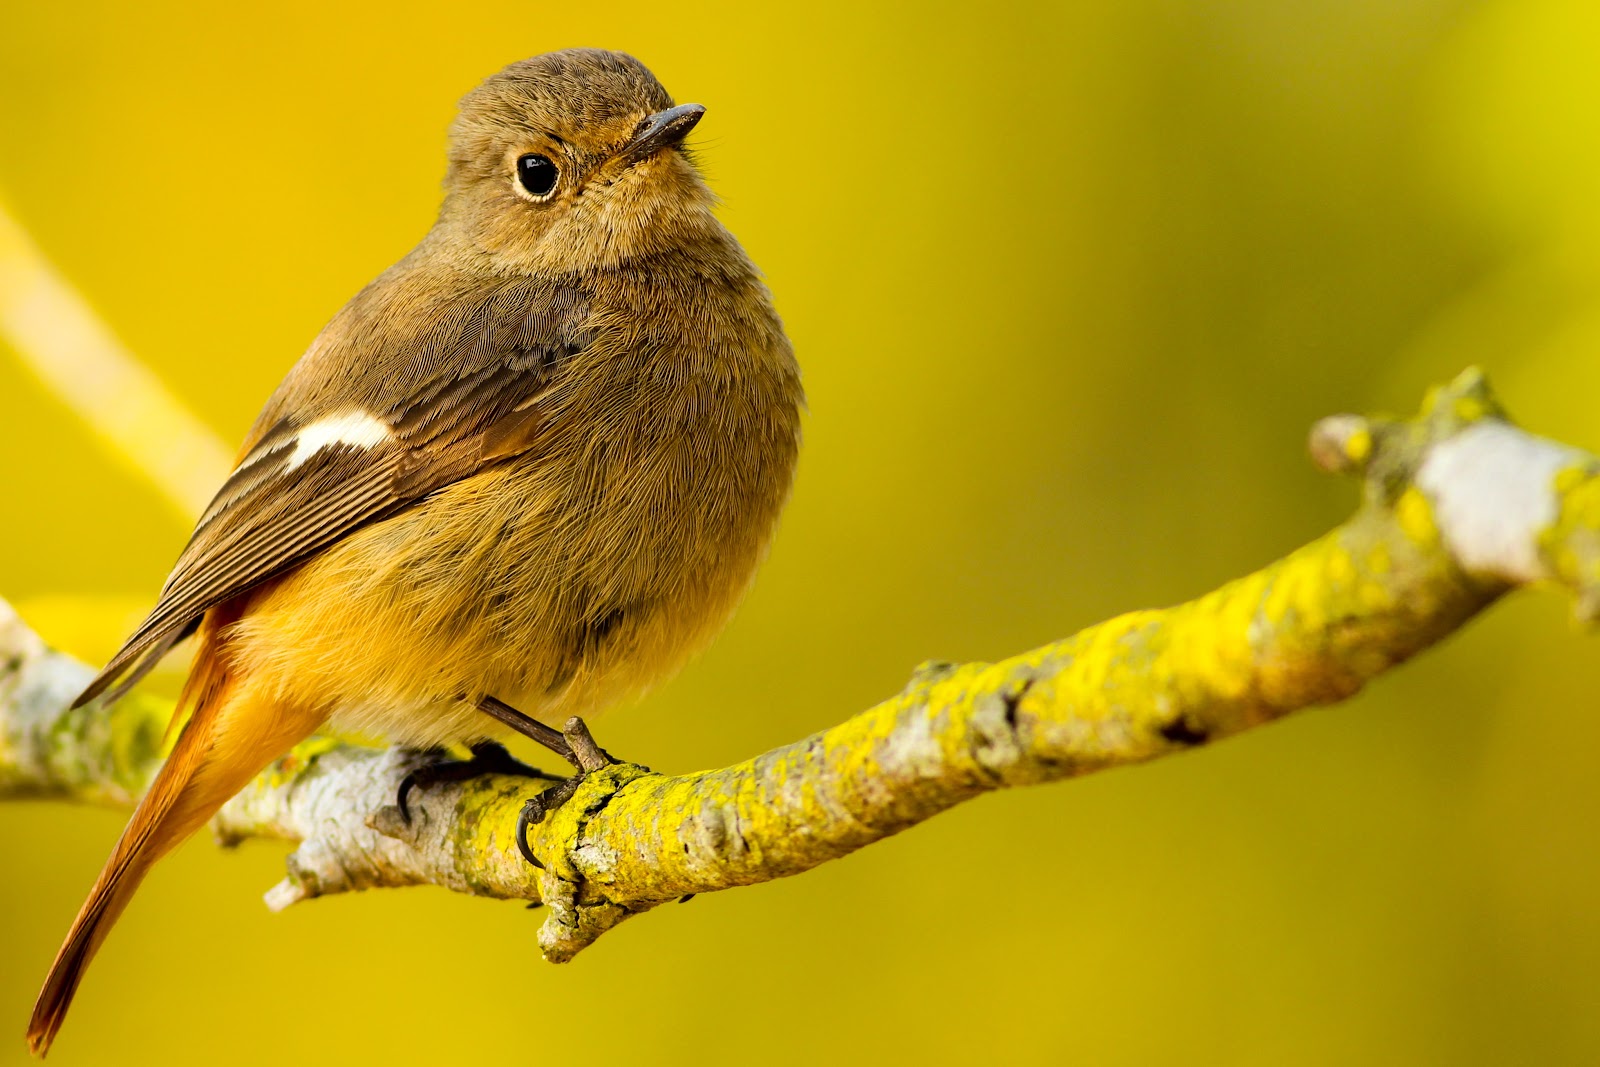 Yellow-lighted photo of brown bird on a thin branch